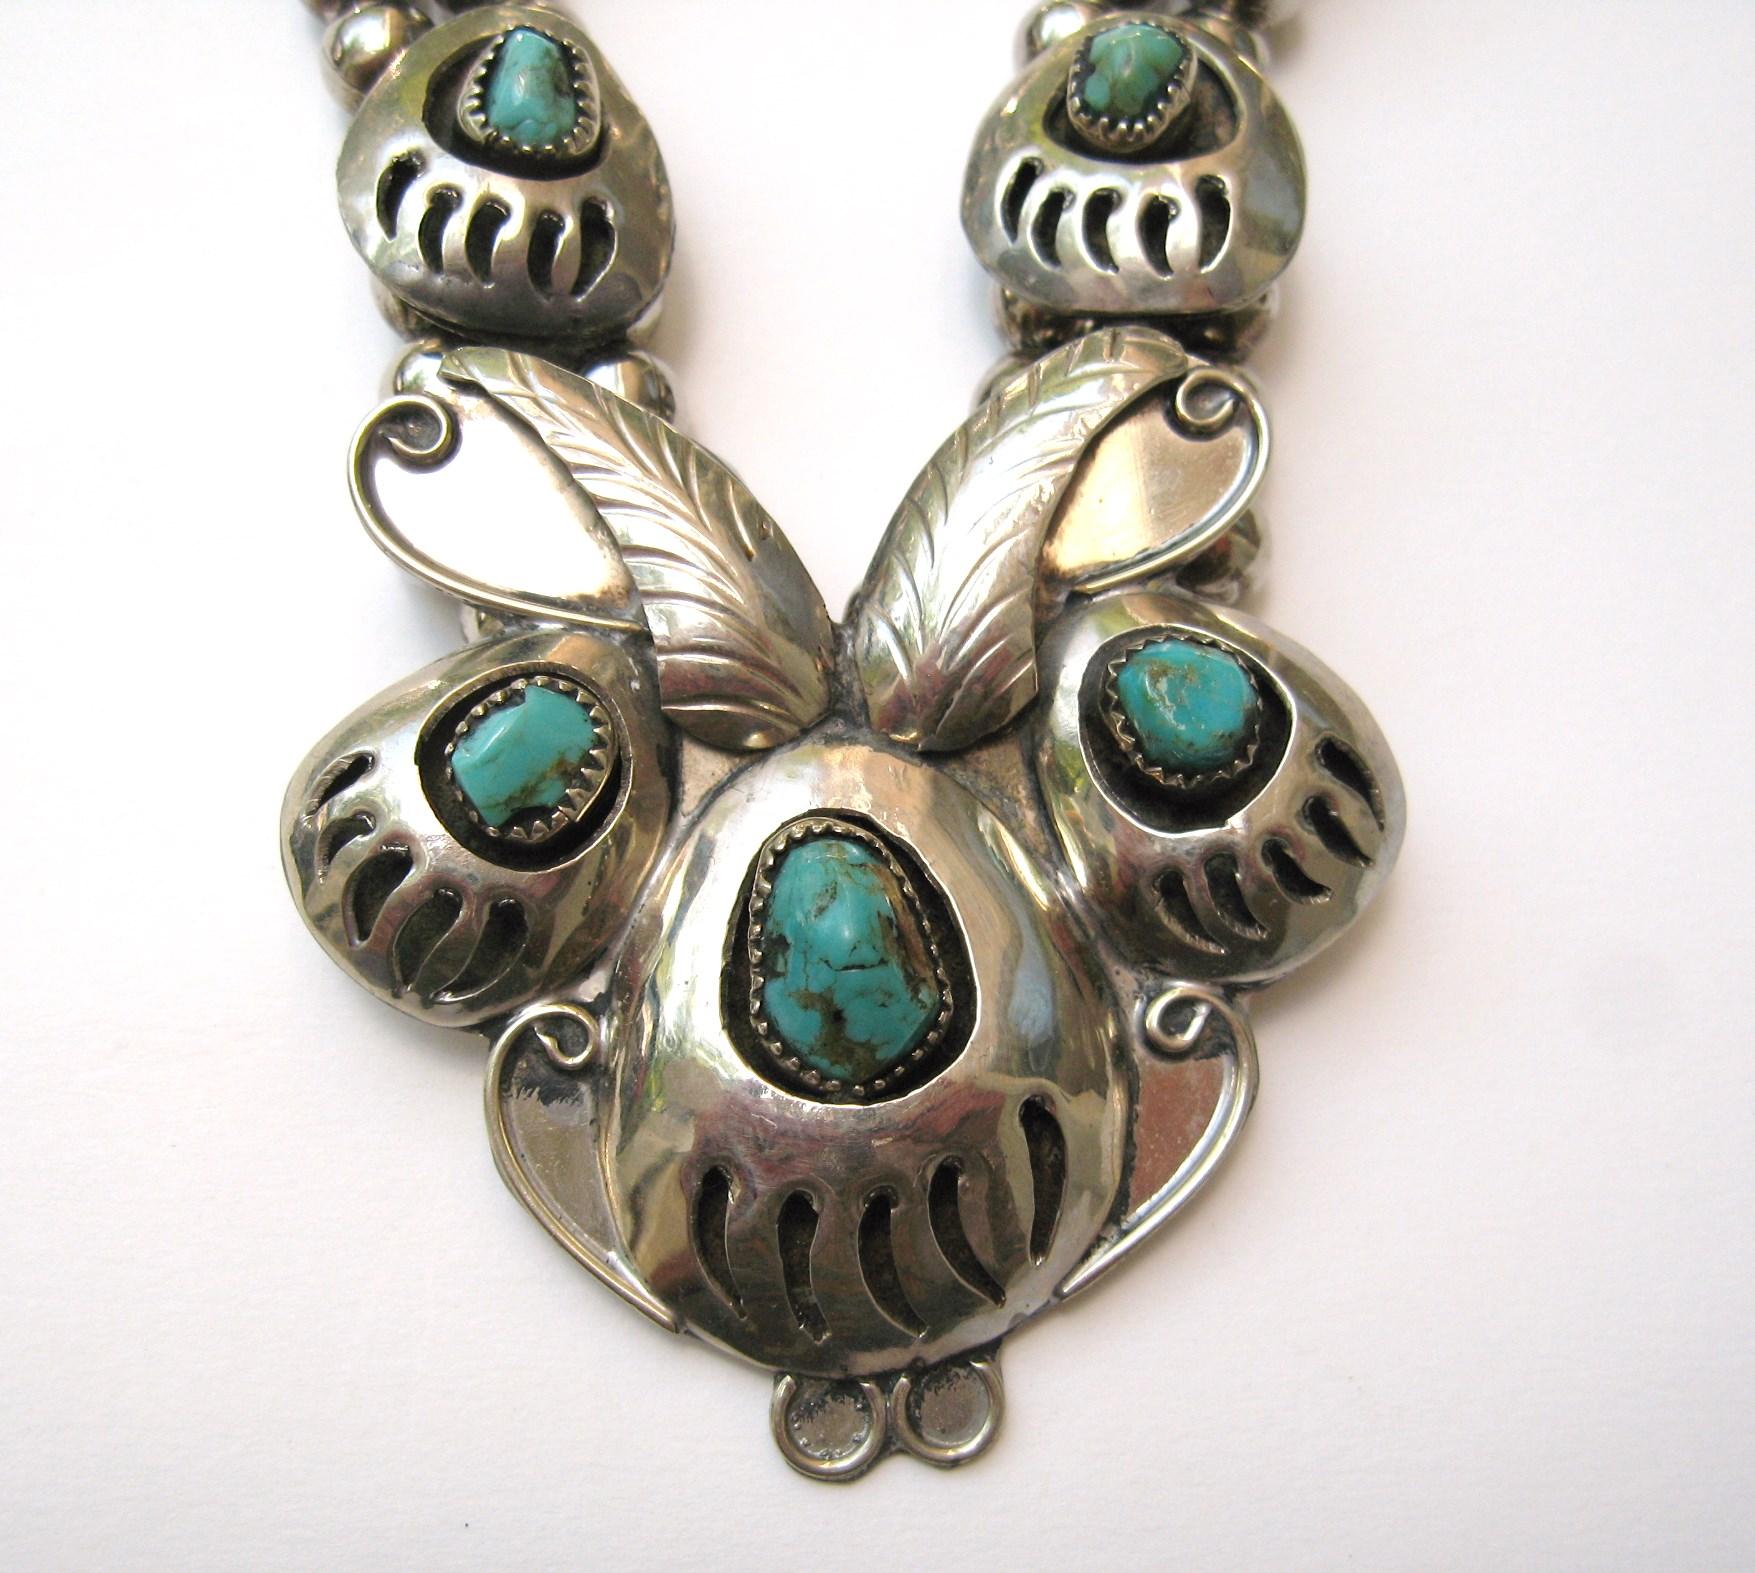 Bear Claw shadowbox Squash Necklace. 9 Inset Turquoise stones set in bear claws. Necklace Measures 22.5 end to end. The drop at the center is approximately 2.30 x 2.30 inches. Double beading graduating to a single bead chain. Hallmarked on the back.